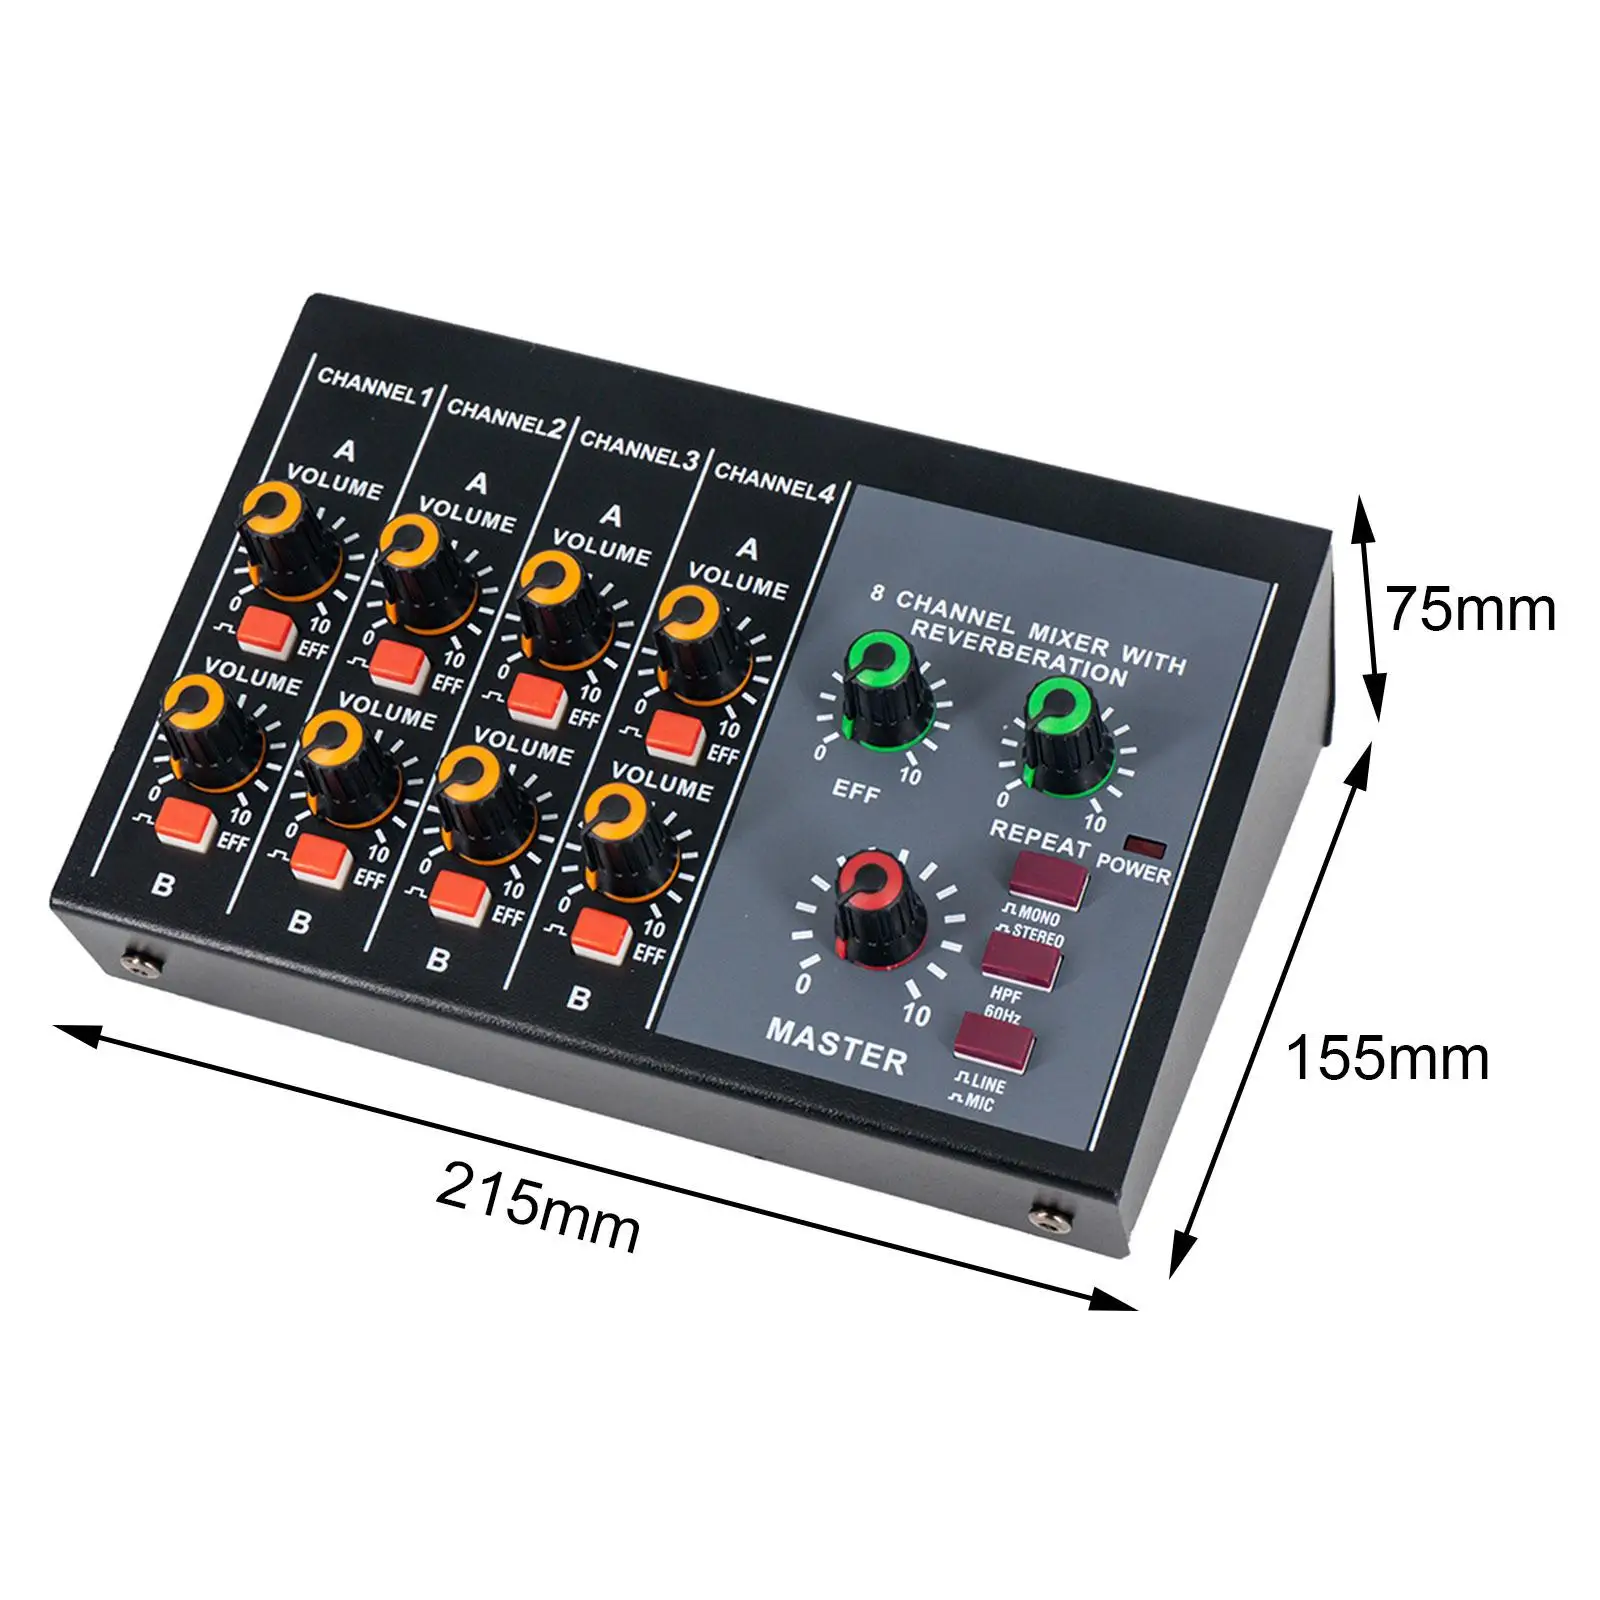 

8 Channel Mixer Professional Compact Audio Mixer Stereo Equalizer for Band Performance Karaoke DJ Stage Microphones Recording